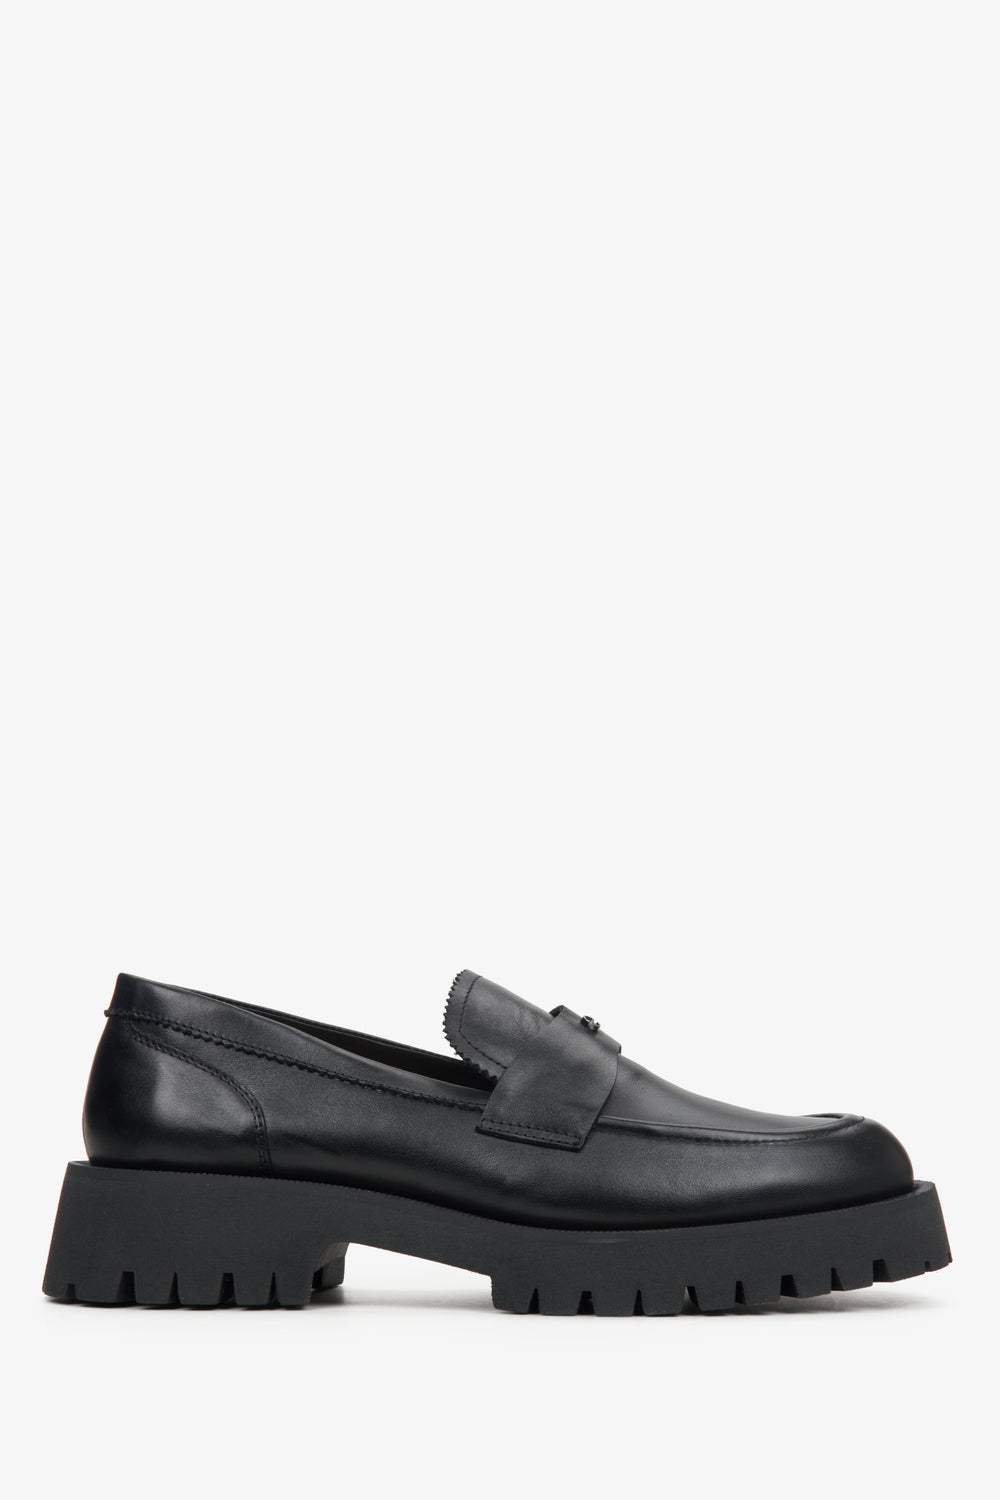 Women's Black Leather Loafers with a Chunky Sole Estro ER00114647.